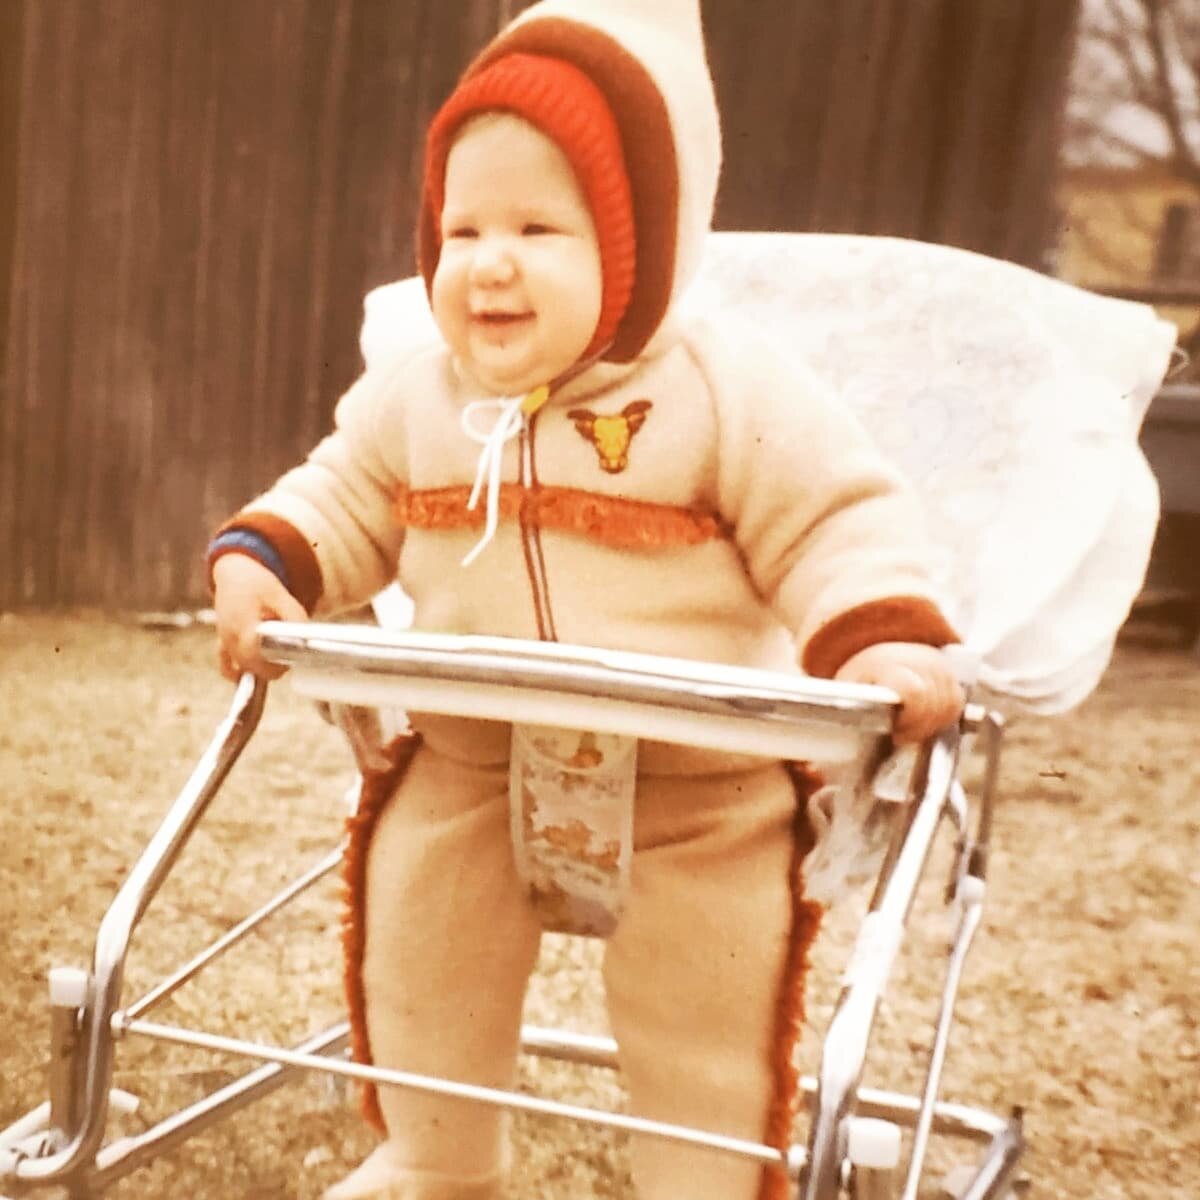 Happy Solstice!!
Here's 2 pictures of me when I was an Elf Baby. 
.
May your Solstice be Peaceful. ☀️🌲💕
 .
.
#solstice #wintersolstice #elfbaby #littleme #throwback #early1980s #babypicture #latvianbaby